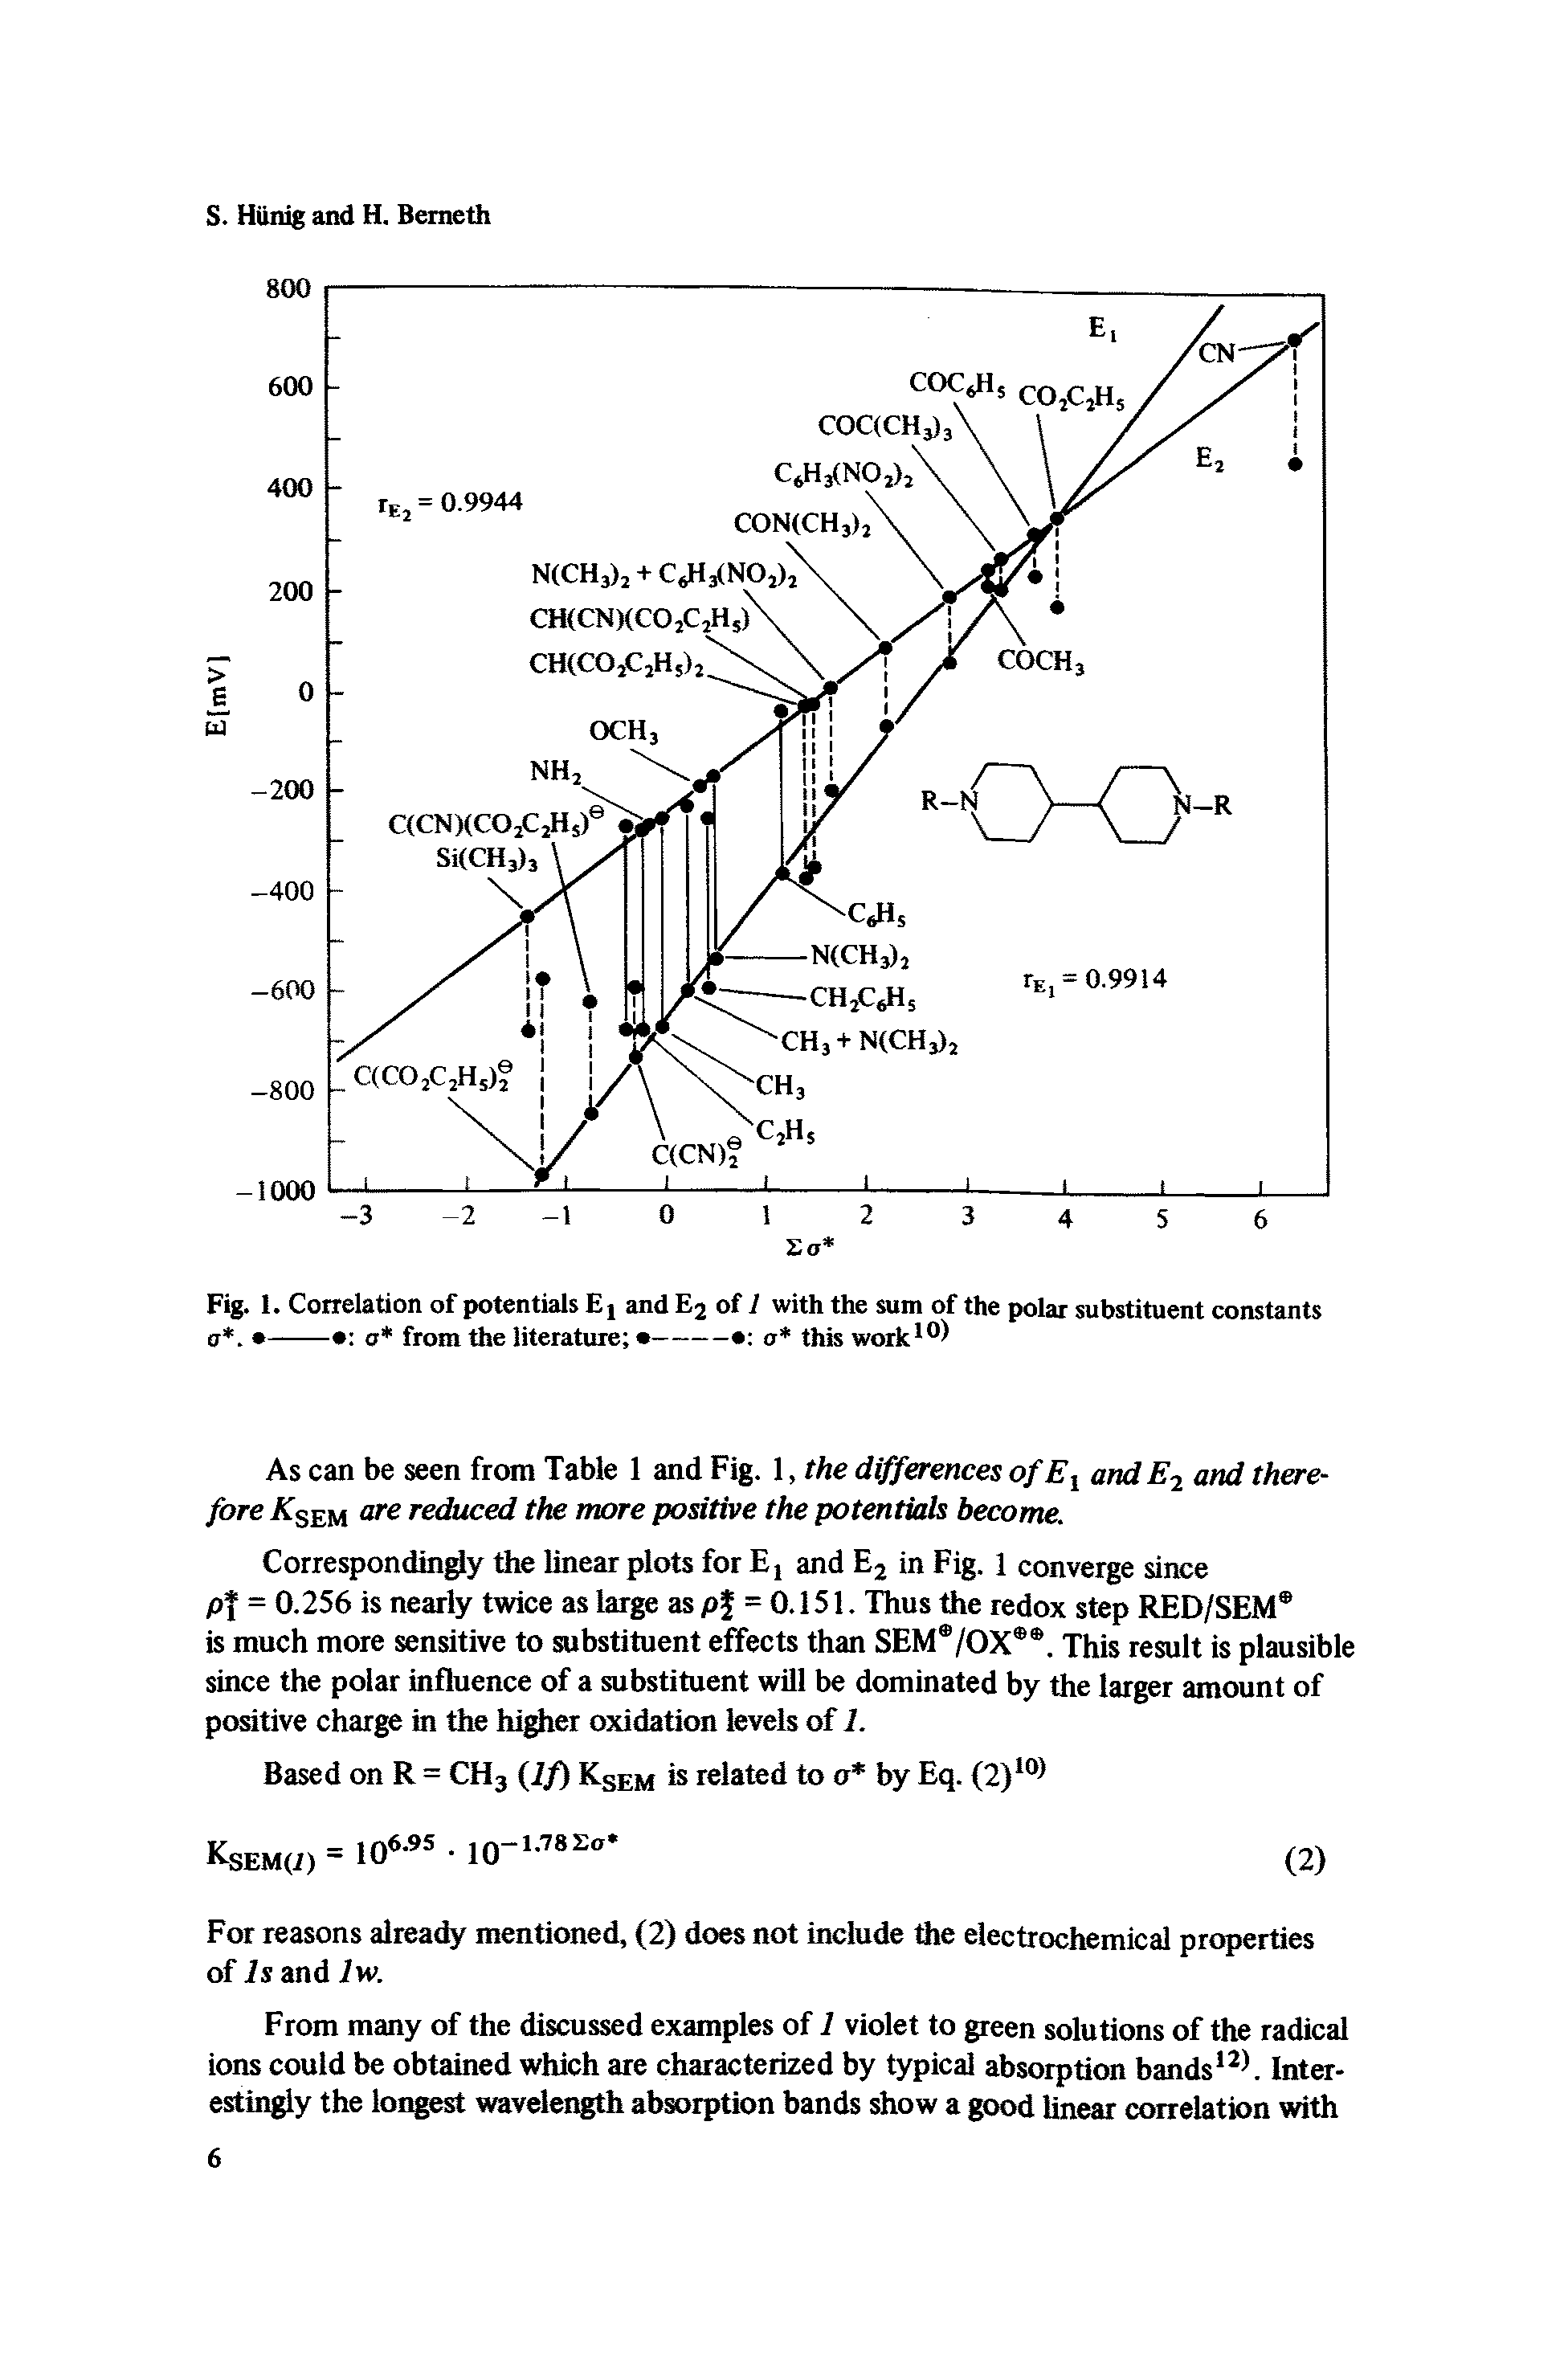 Fig. 1. Correlation of potentials Ej and Ej of 1 with the sum of the polar substituent constants a. ----- a from the literature --- o this work )...